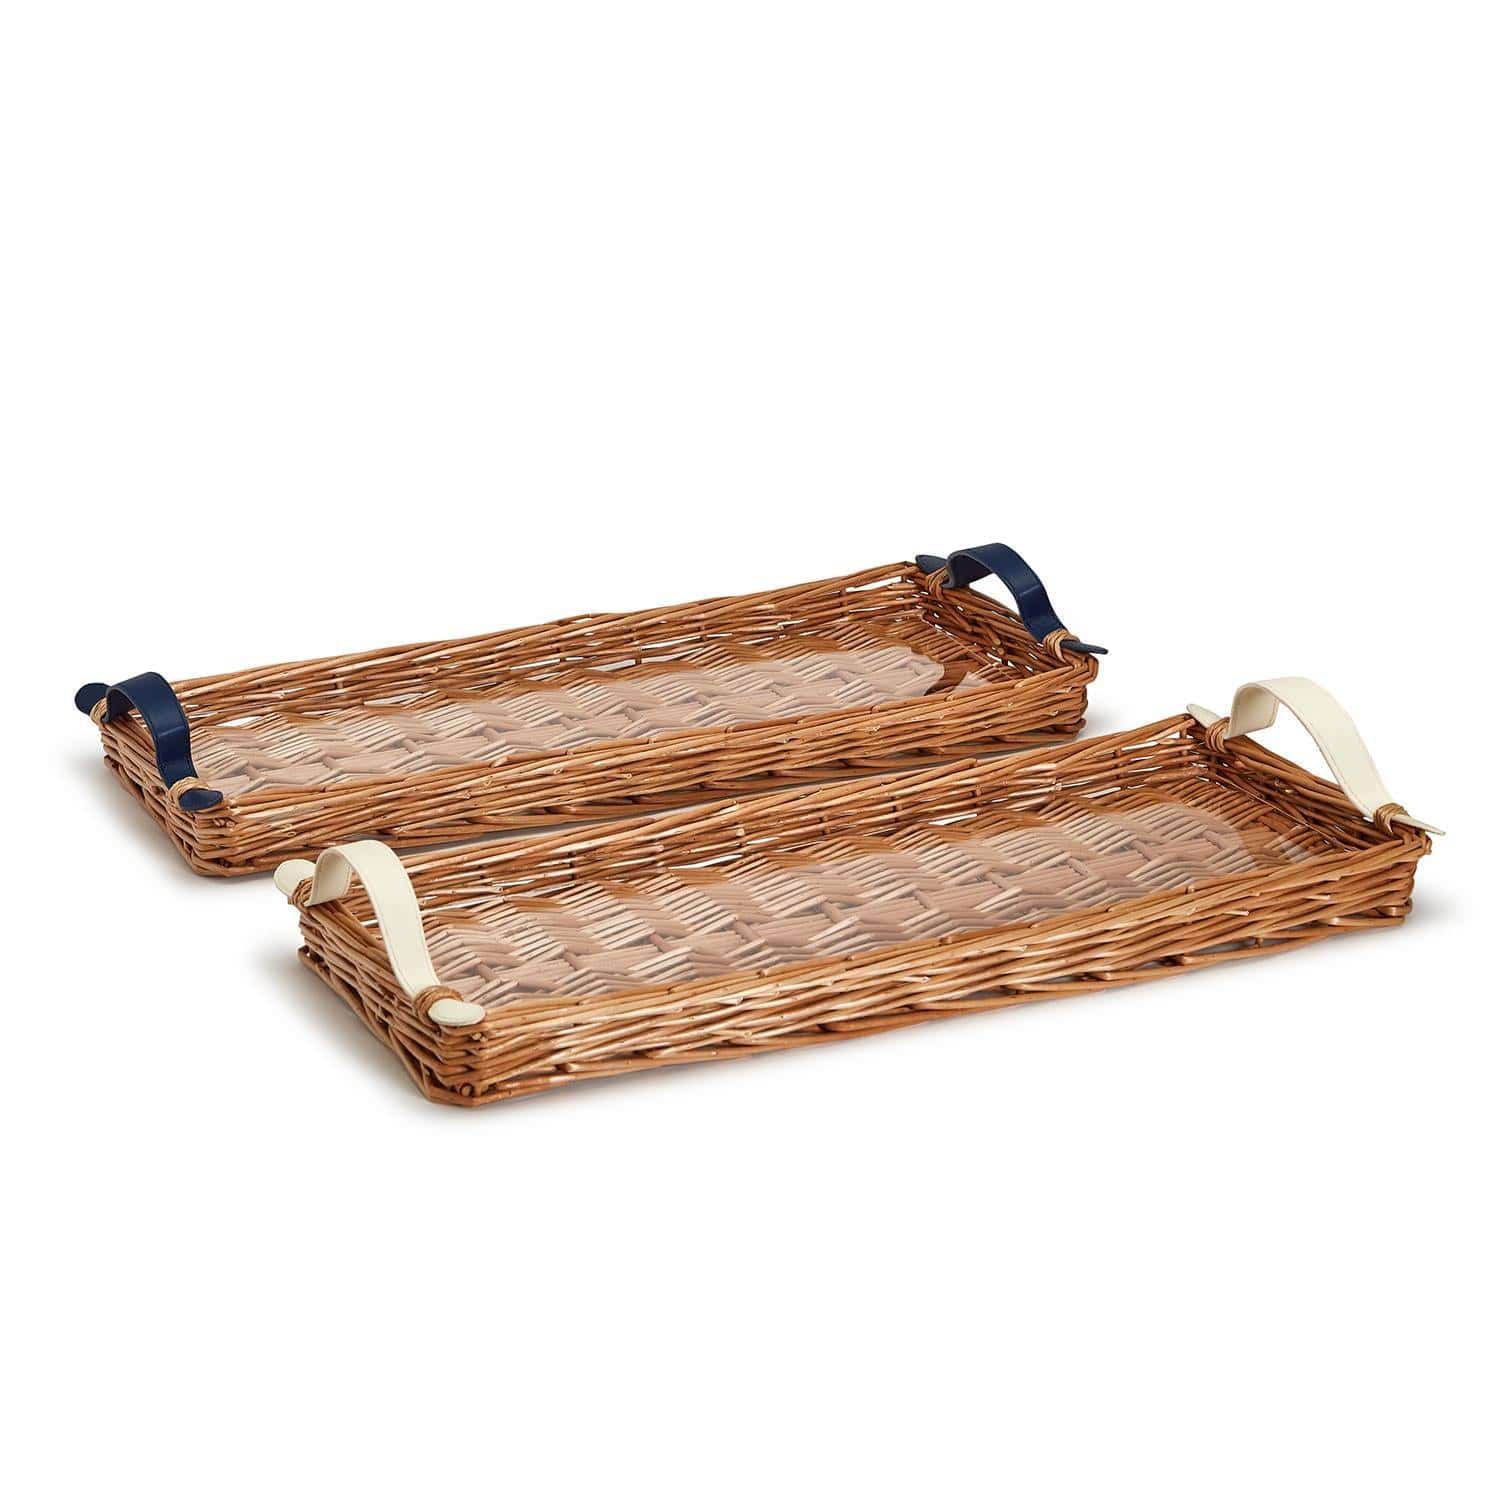 Wicker Tray with Acrylic Insert - 2 colors available - The Preppy Bunny